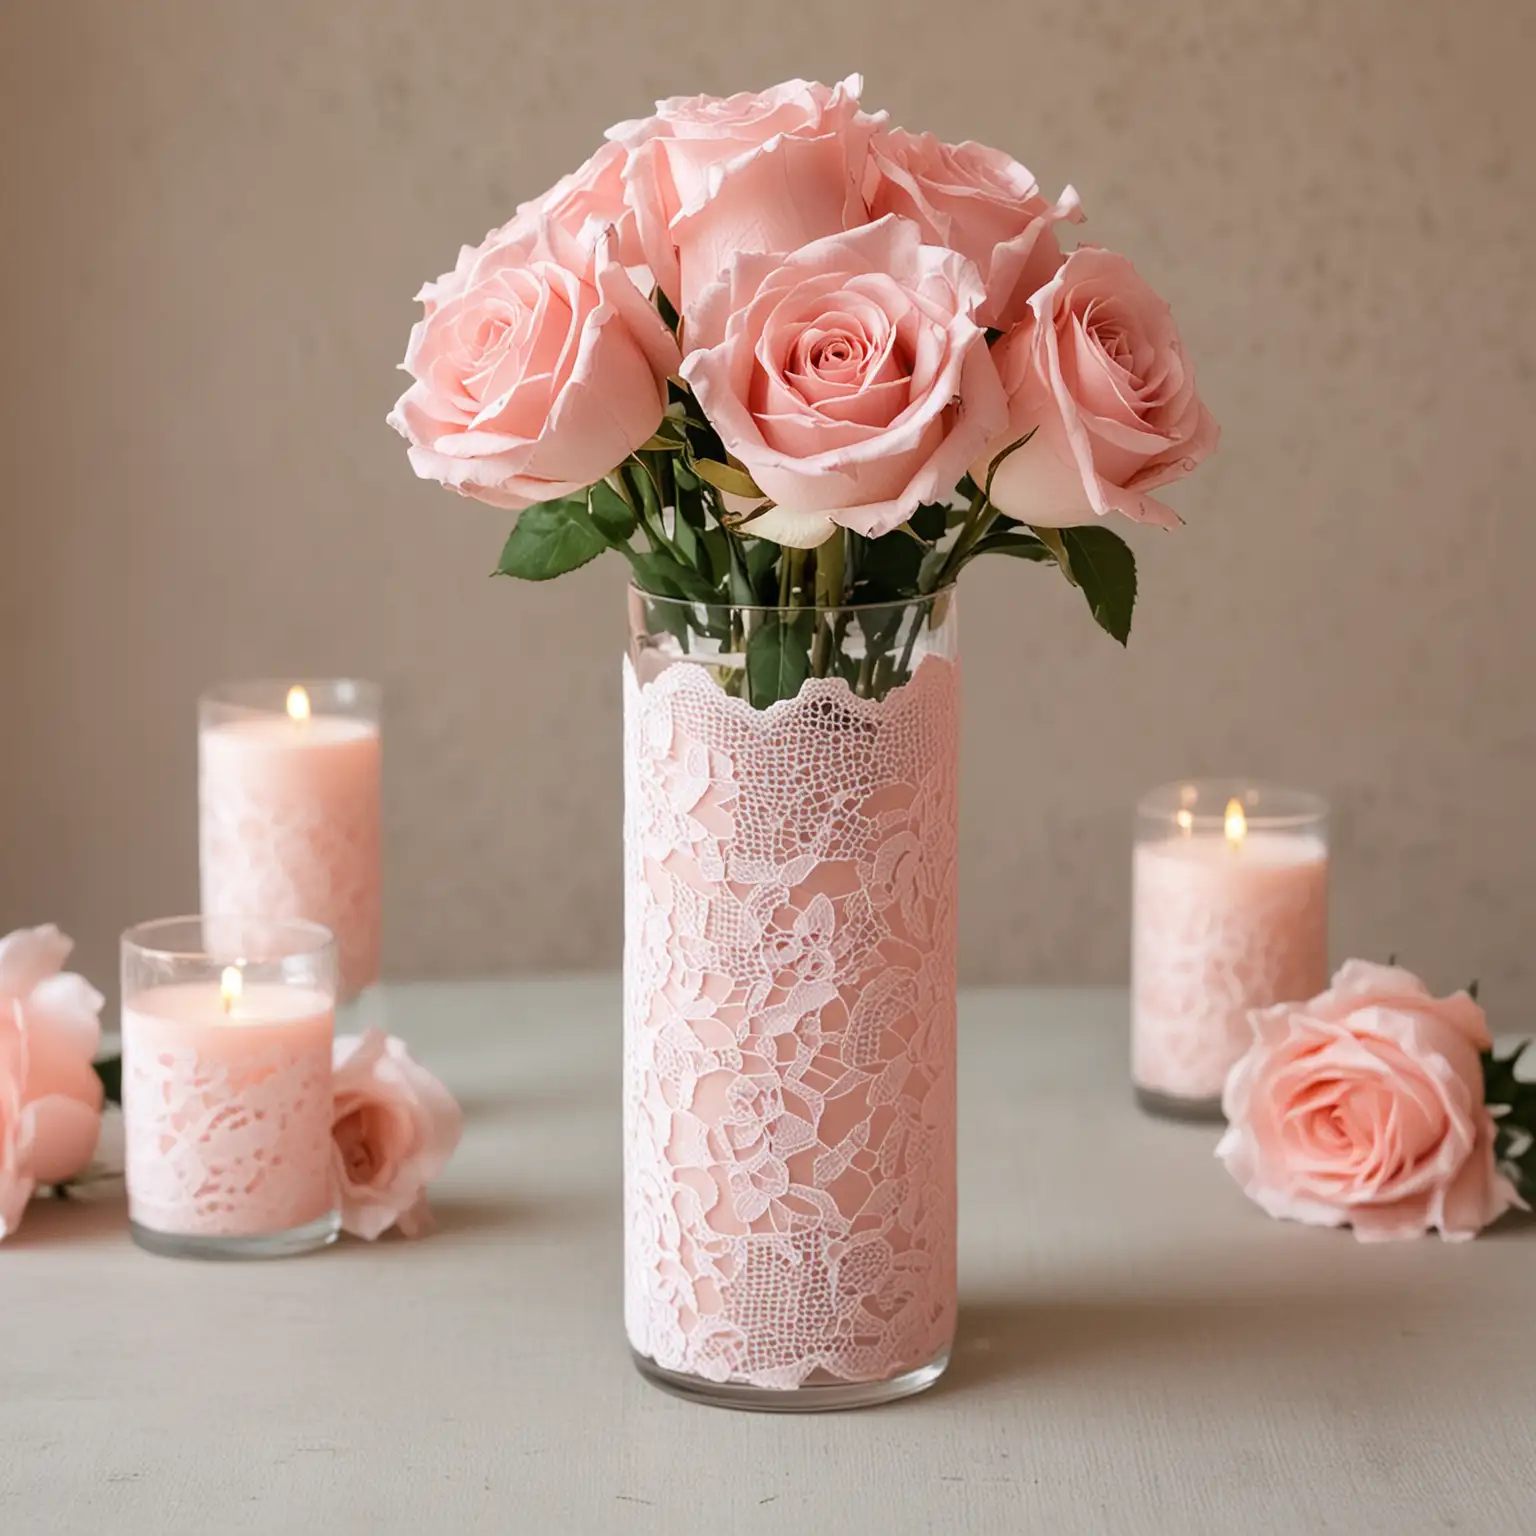 simple cylinder glass vase wedding centerpiece DIY covered with beautiful blush pink lace with blush pink roses